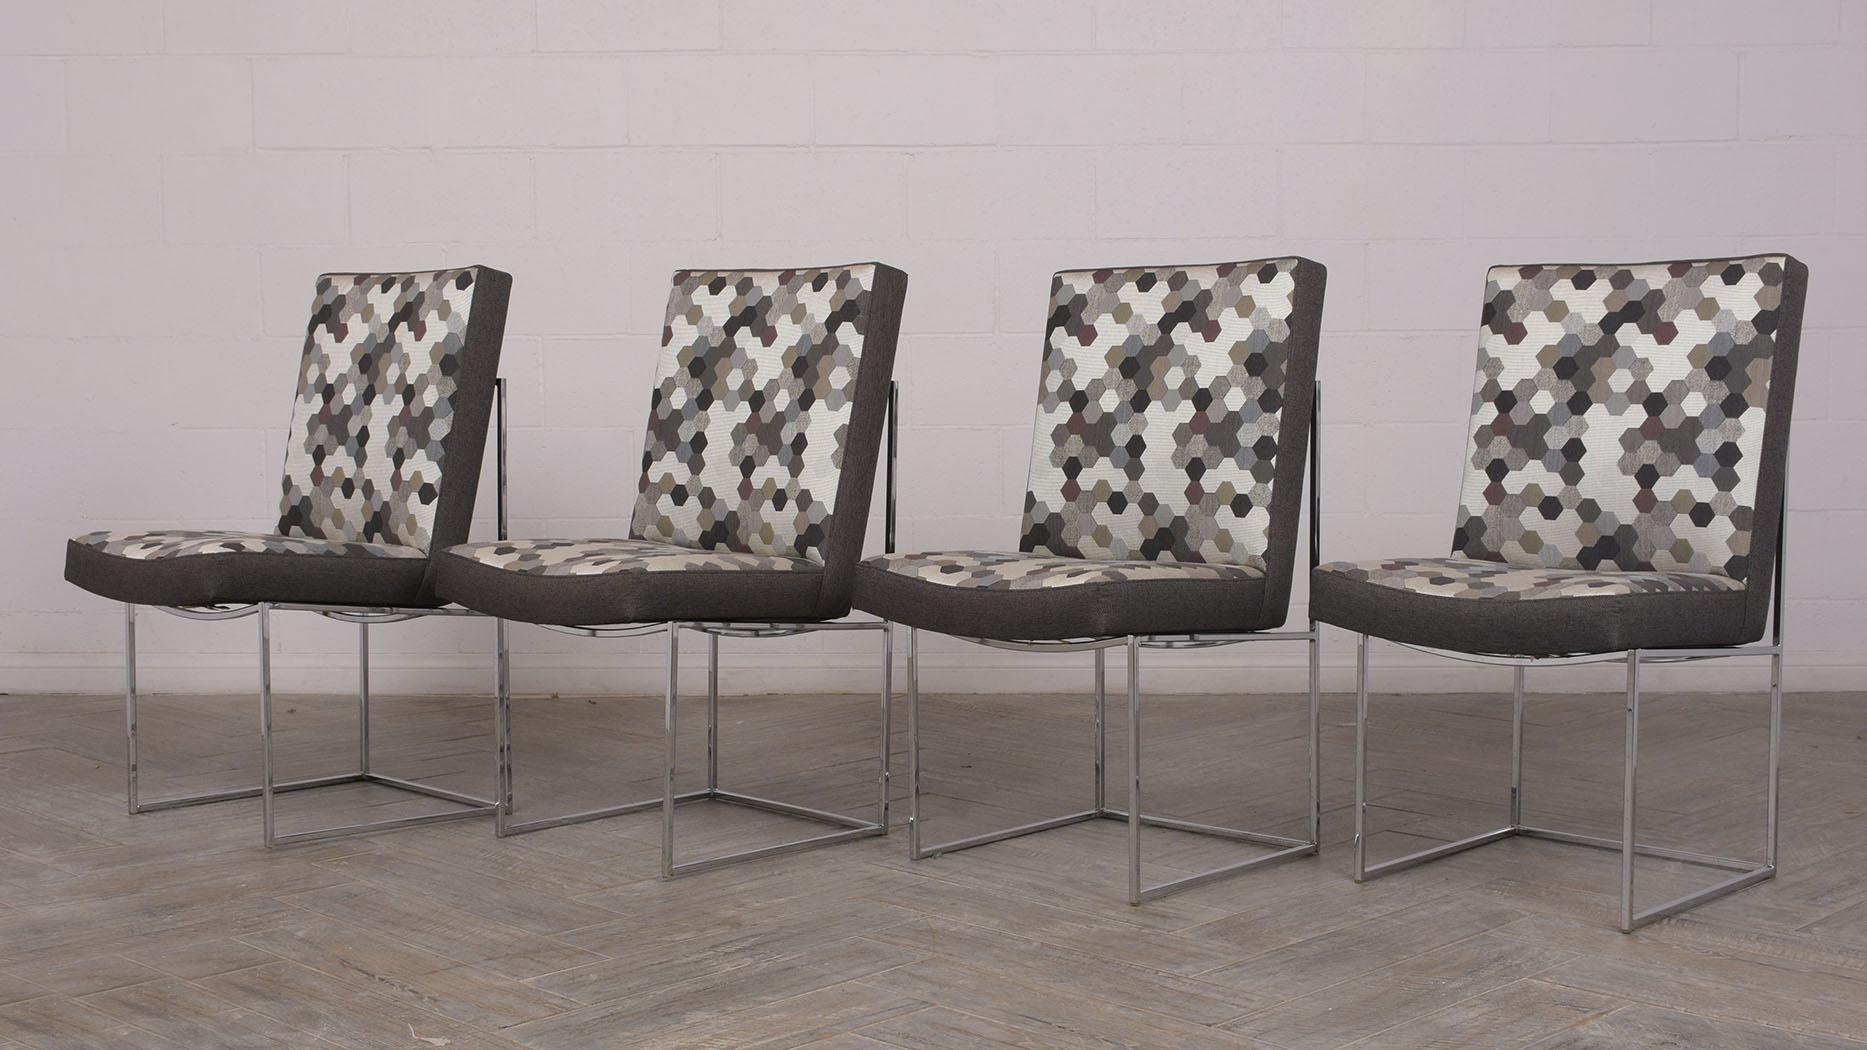 Polished Set of 8 Modern Milo Baughman for Thayer Square Chrome Framed Dining Chairs